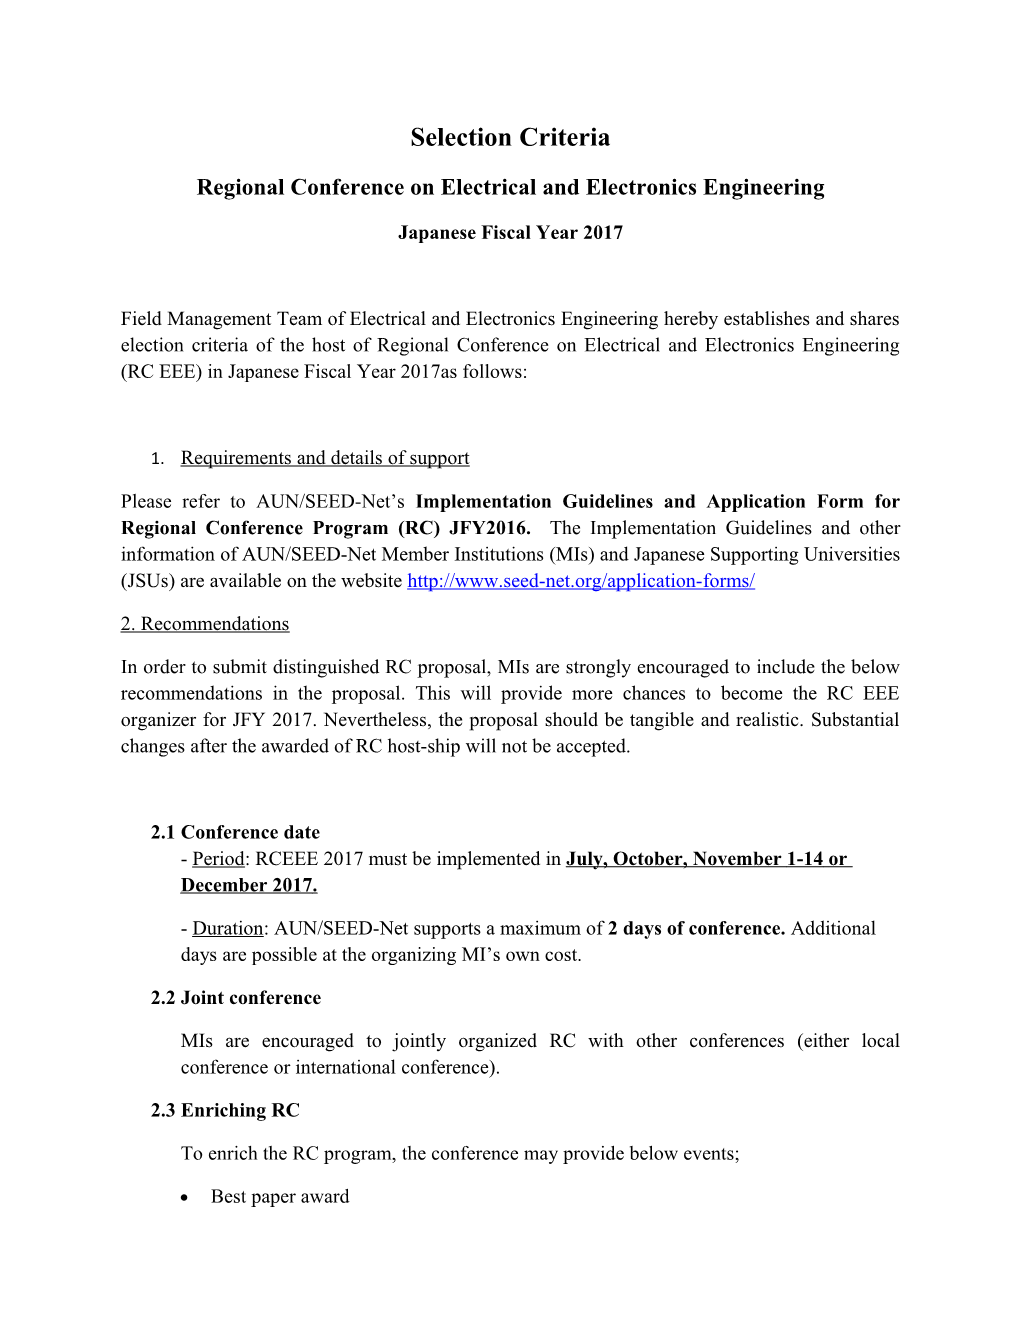 Regional Conference on Electrical and Electronics Engineering